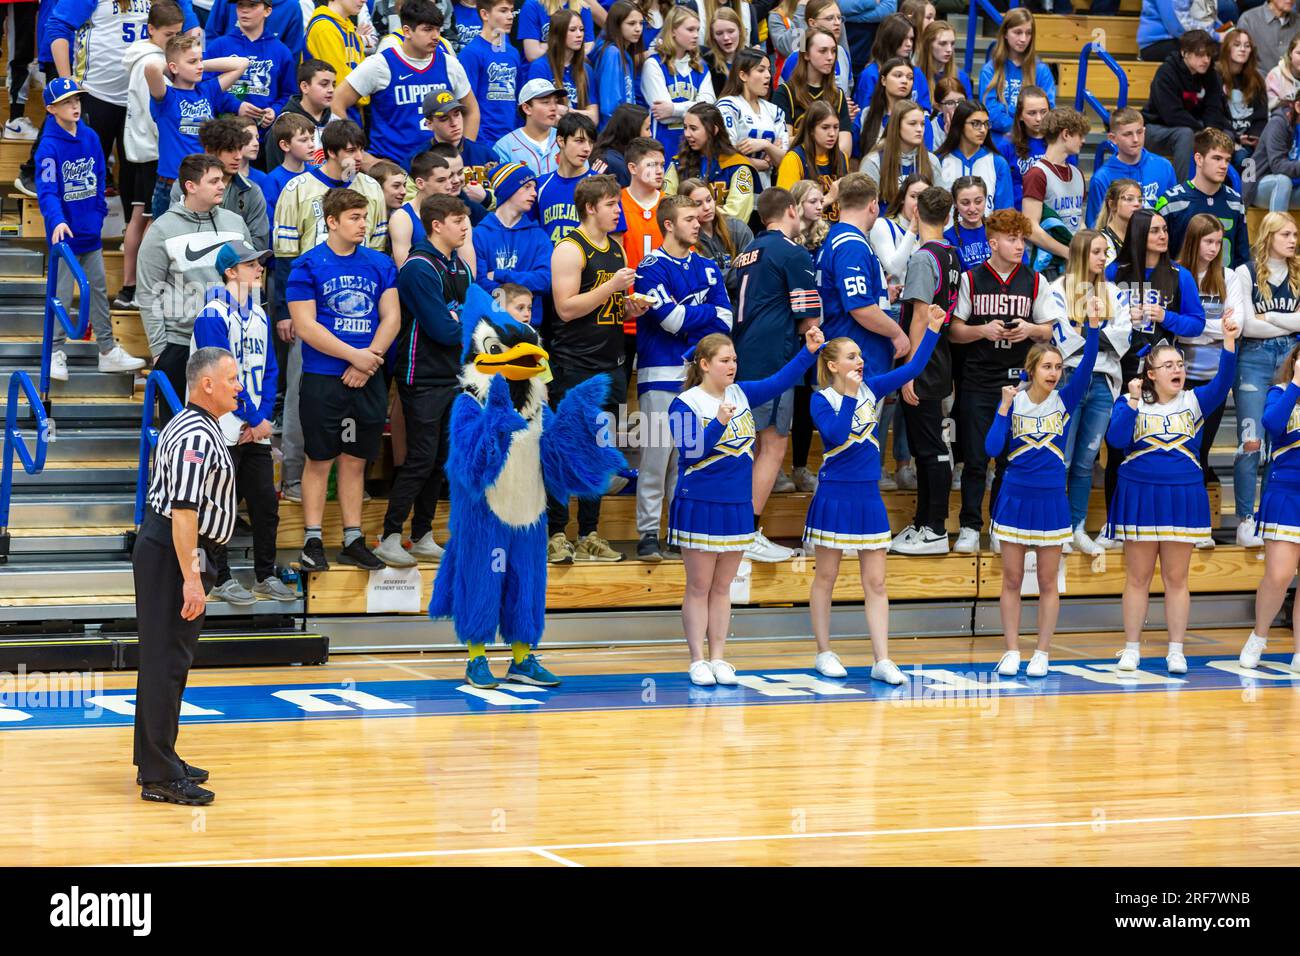 An official, the North Judson San Pierre High School cheerleaders, their cheer block and mascot watch a game in North Judson, Indiana, USA. Stock Photo